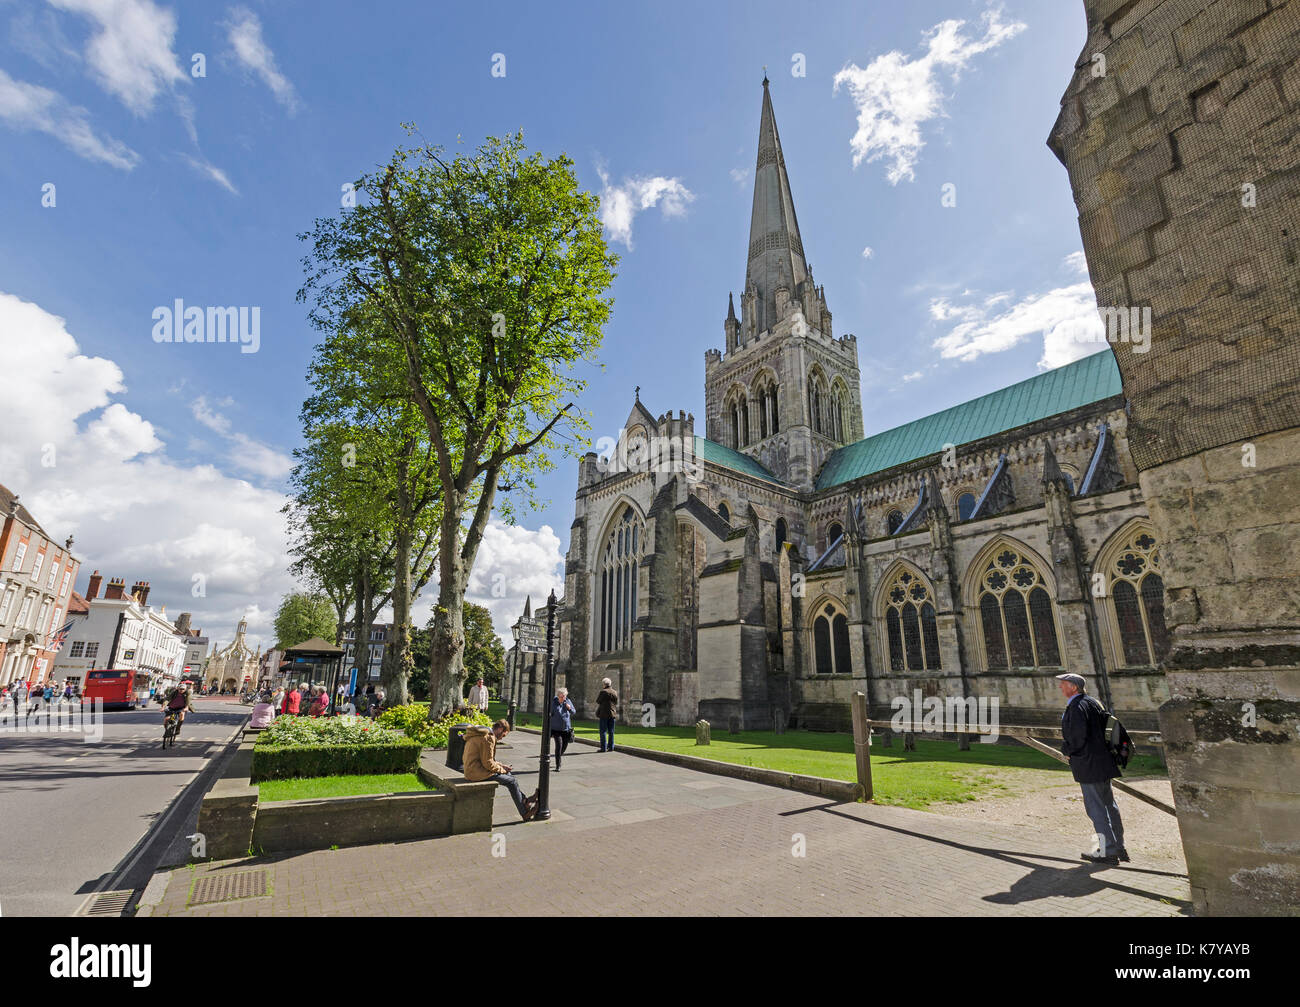 Chichester Kathedrale Stockfoto